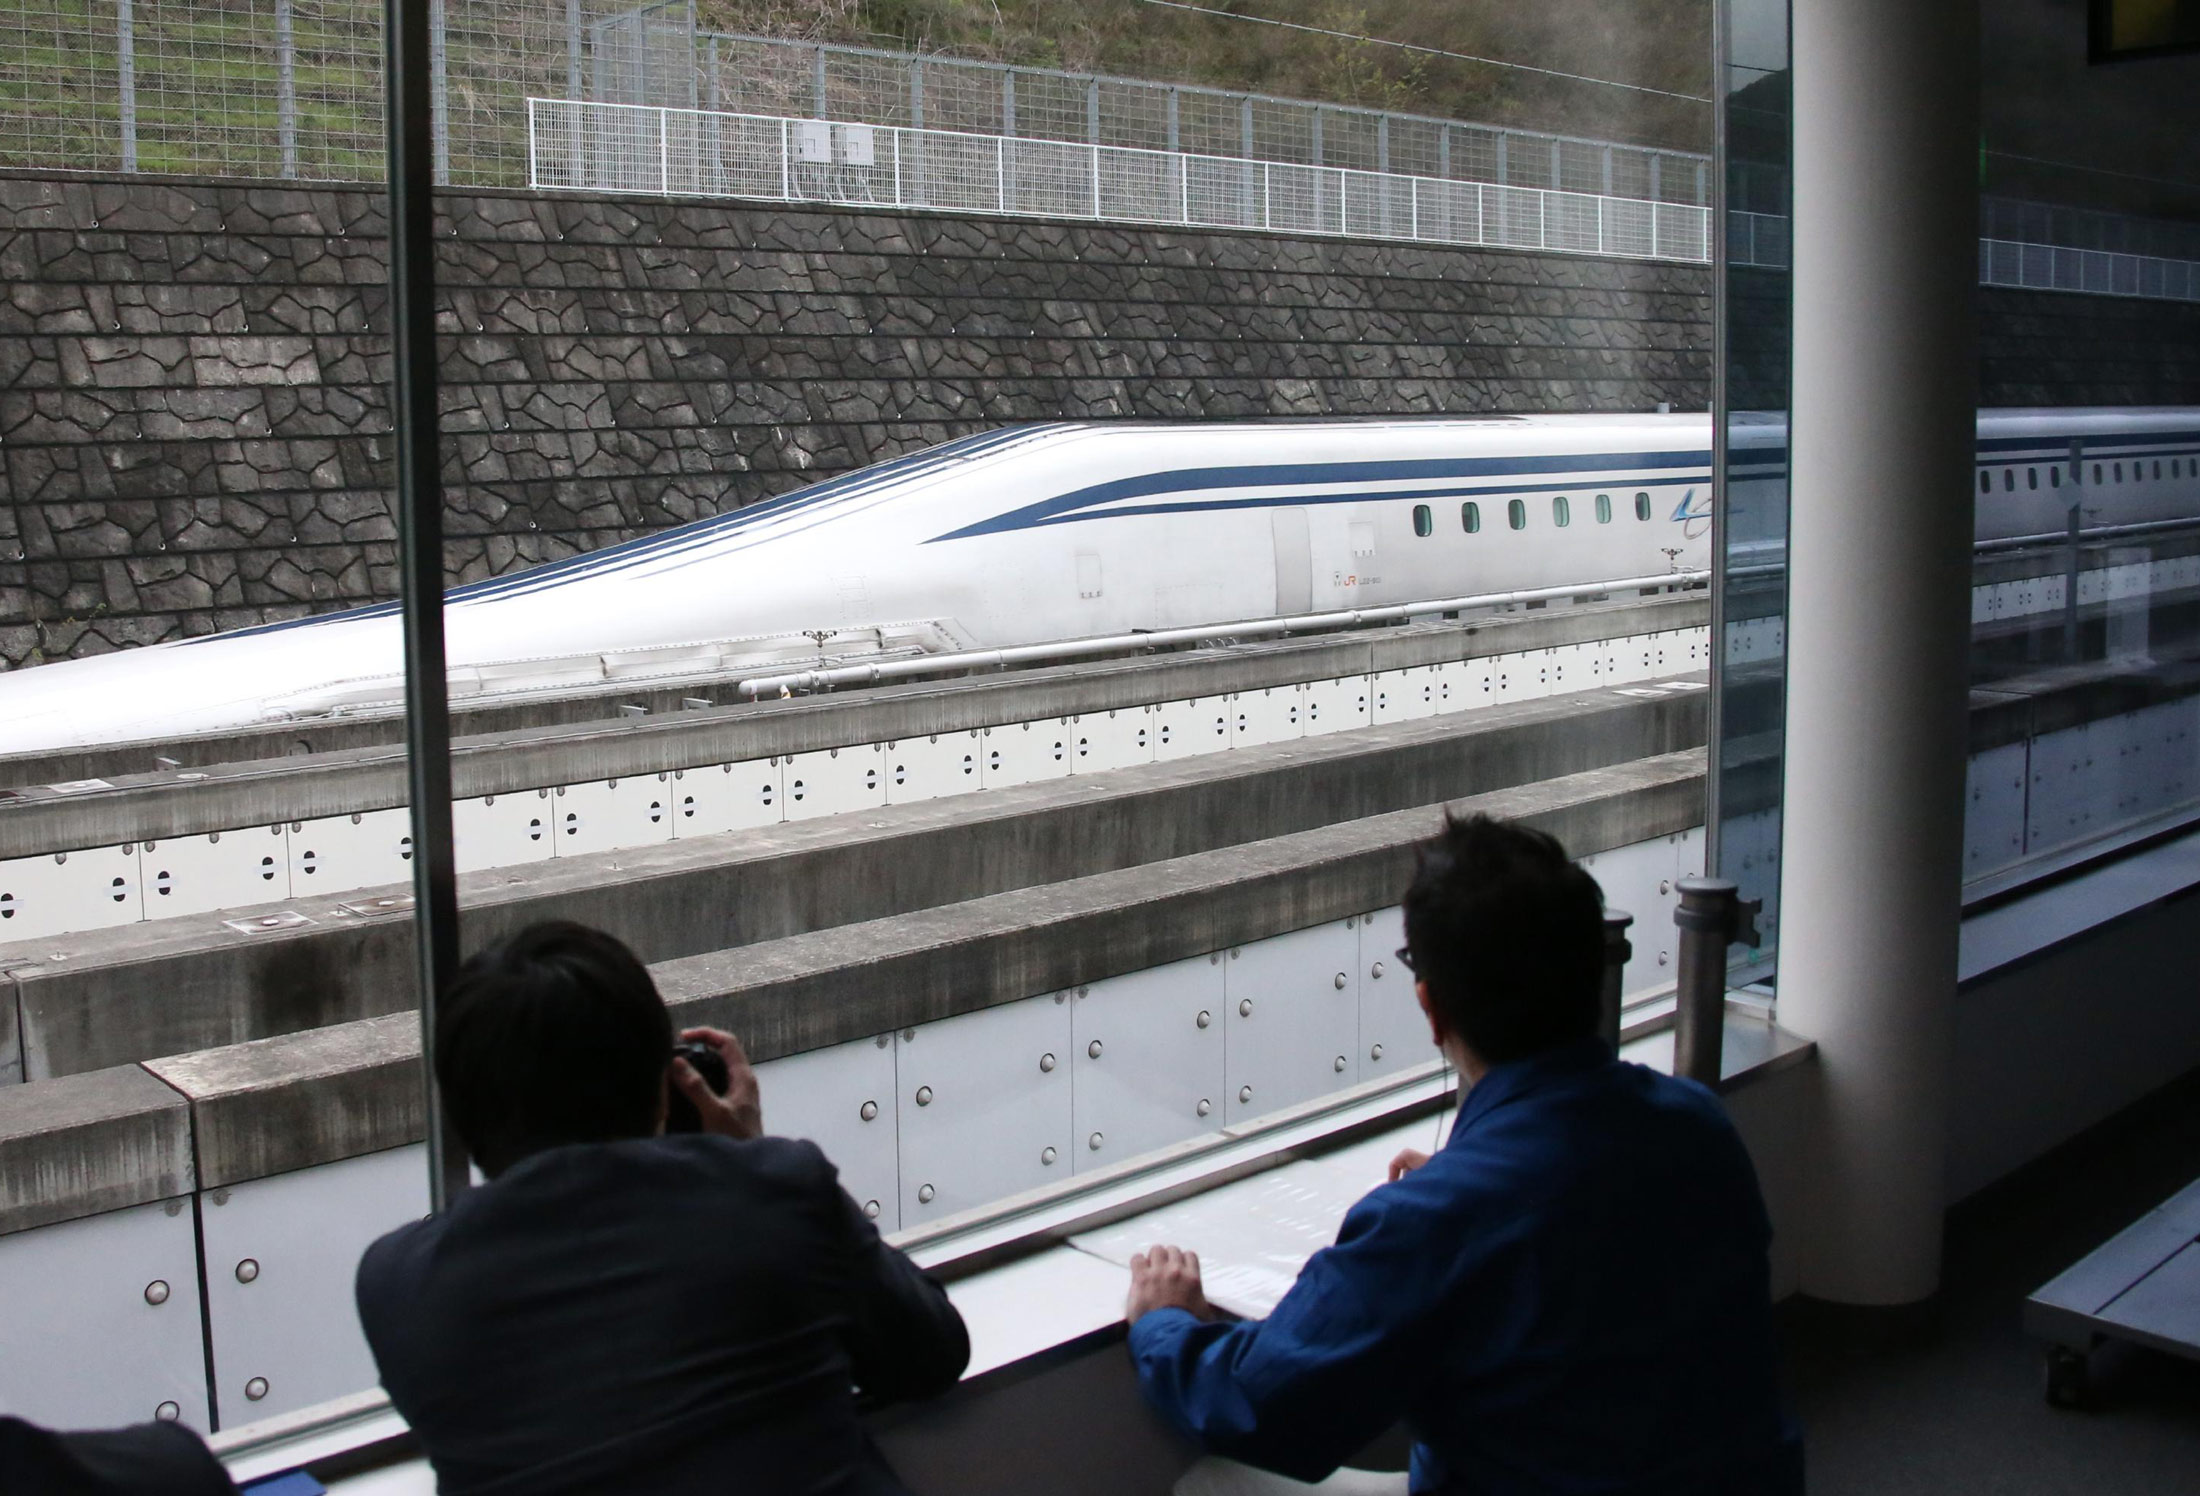 The record-breaking run is part of the tests before JR Central can start commercial operations in 2027 on the Tokyo-Nagoya line, which it’s constructing at a cost of 5.52 trillion yen ($47 billion).
